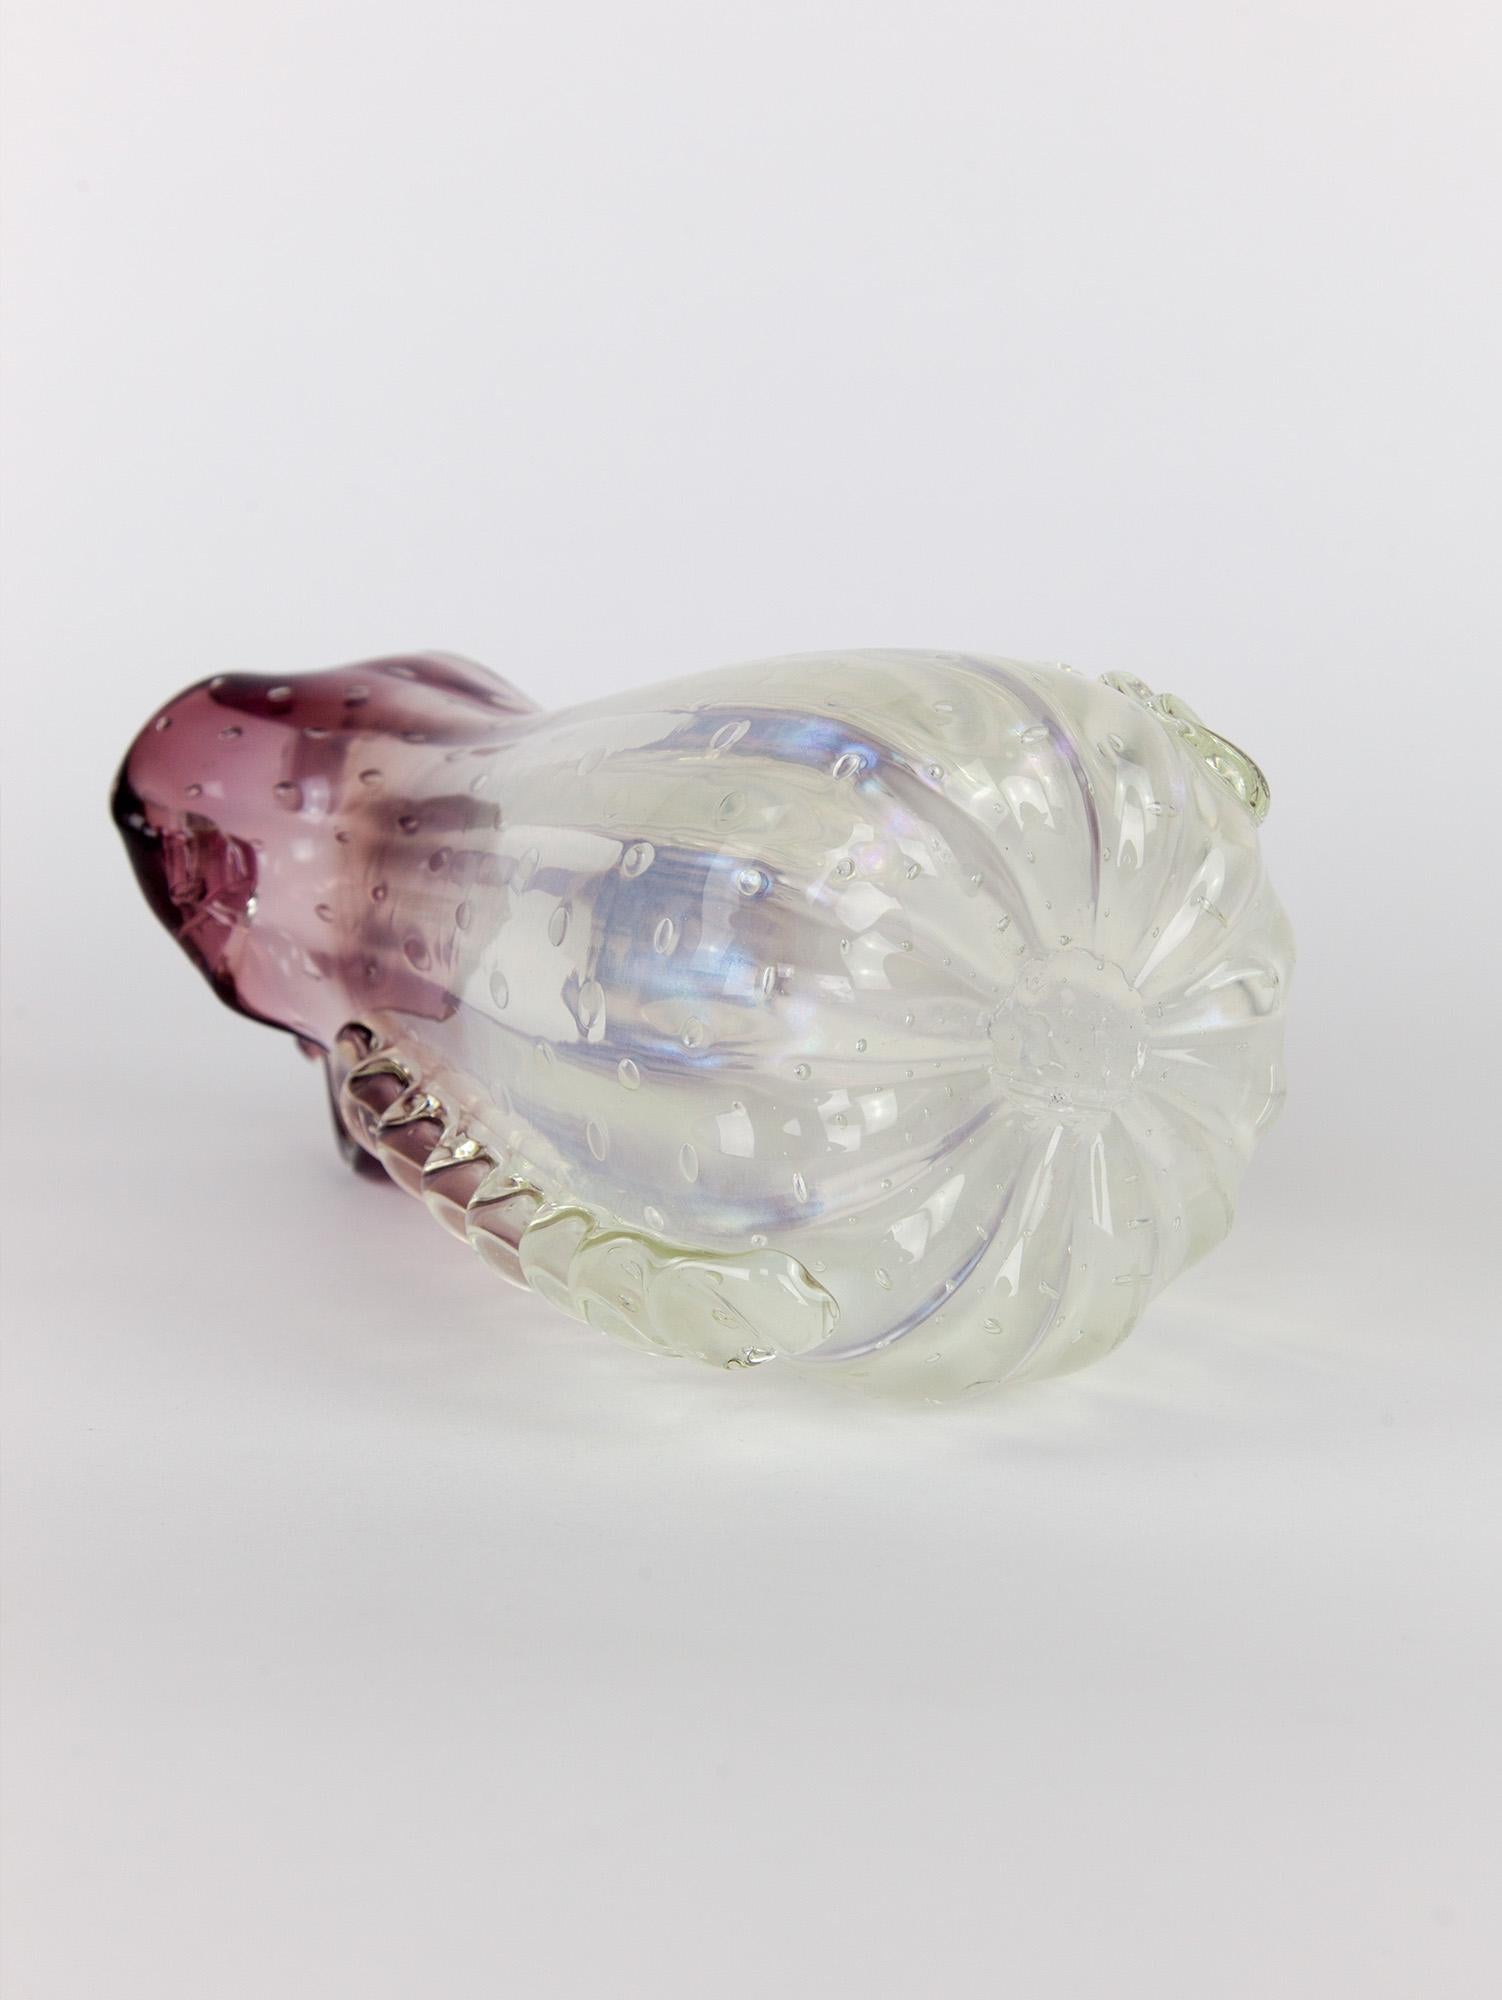 Vintage Italian Murano Pearlescent Glass Vase, 1940s For Sale 5